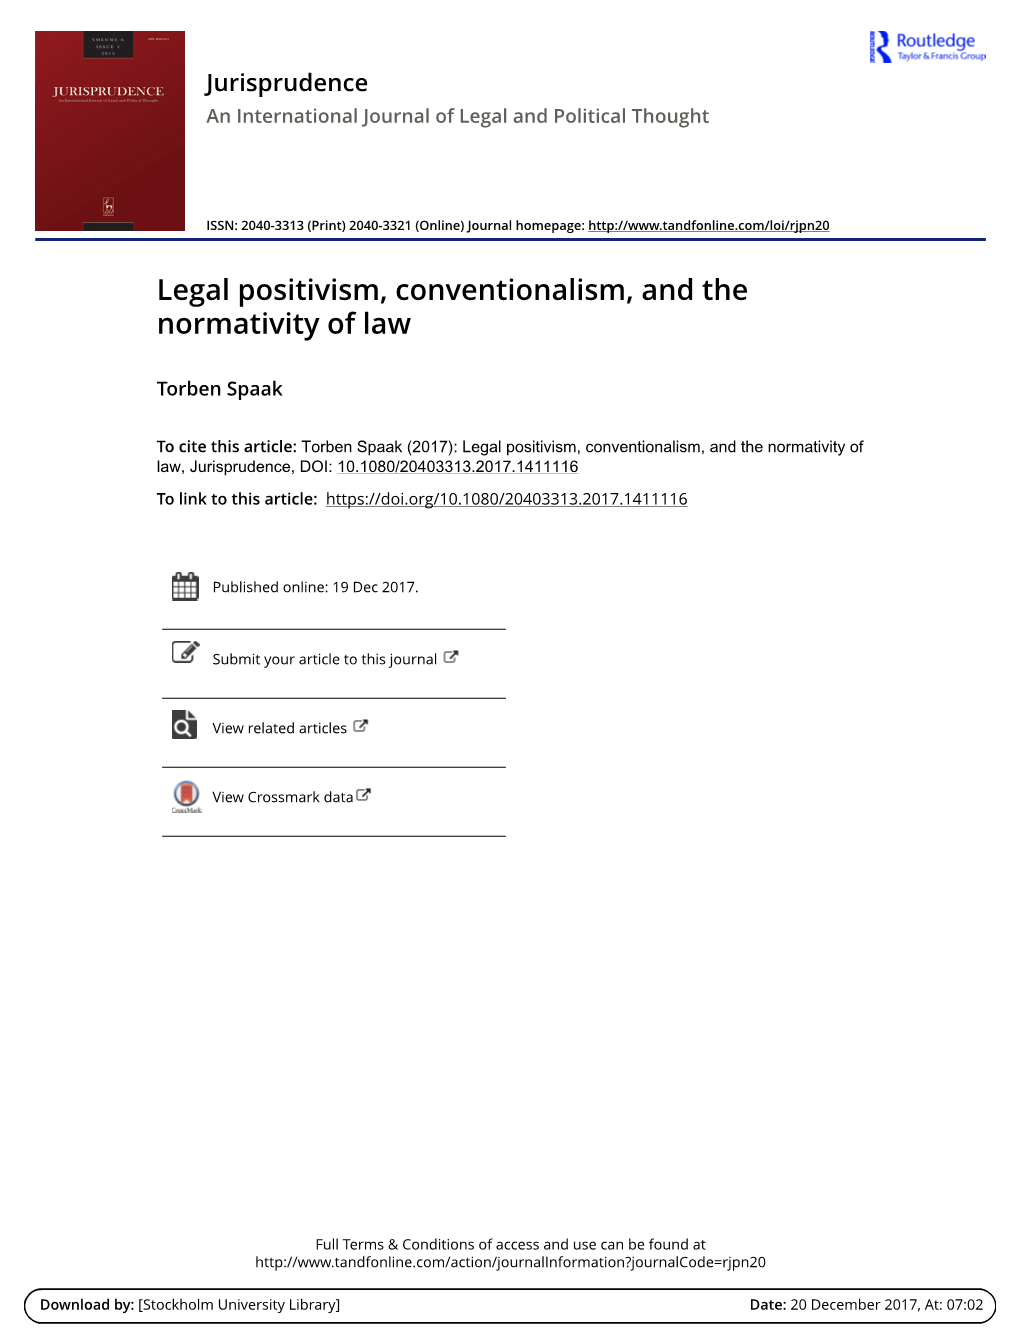 Legal Positivism, Conventionalism, and the Normativity of Law